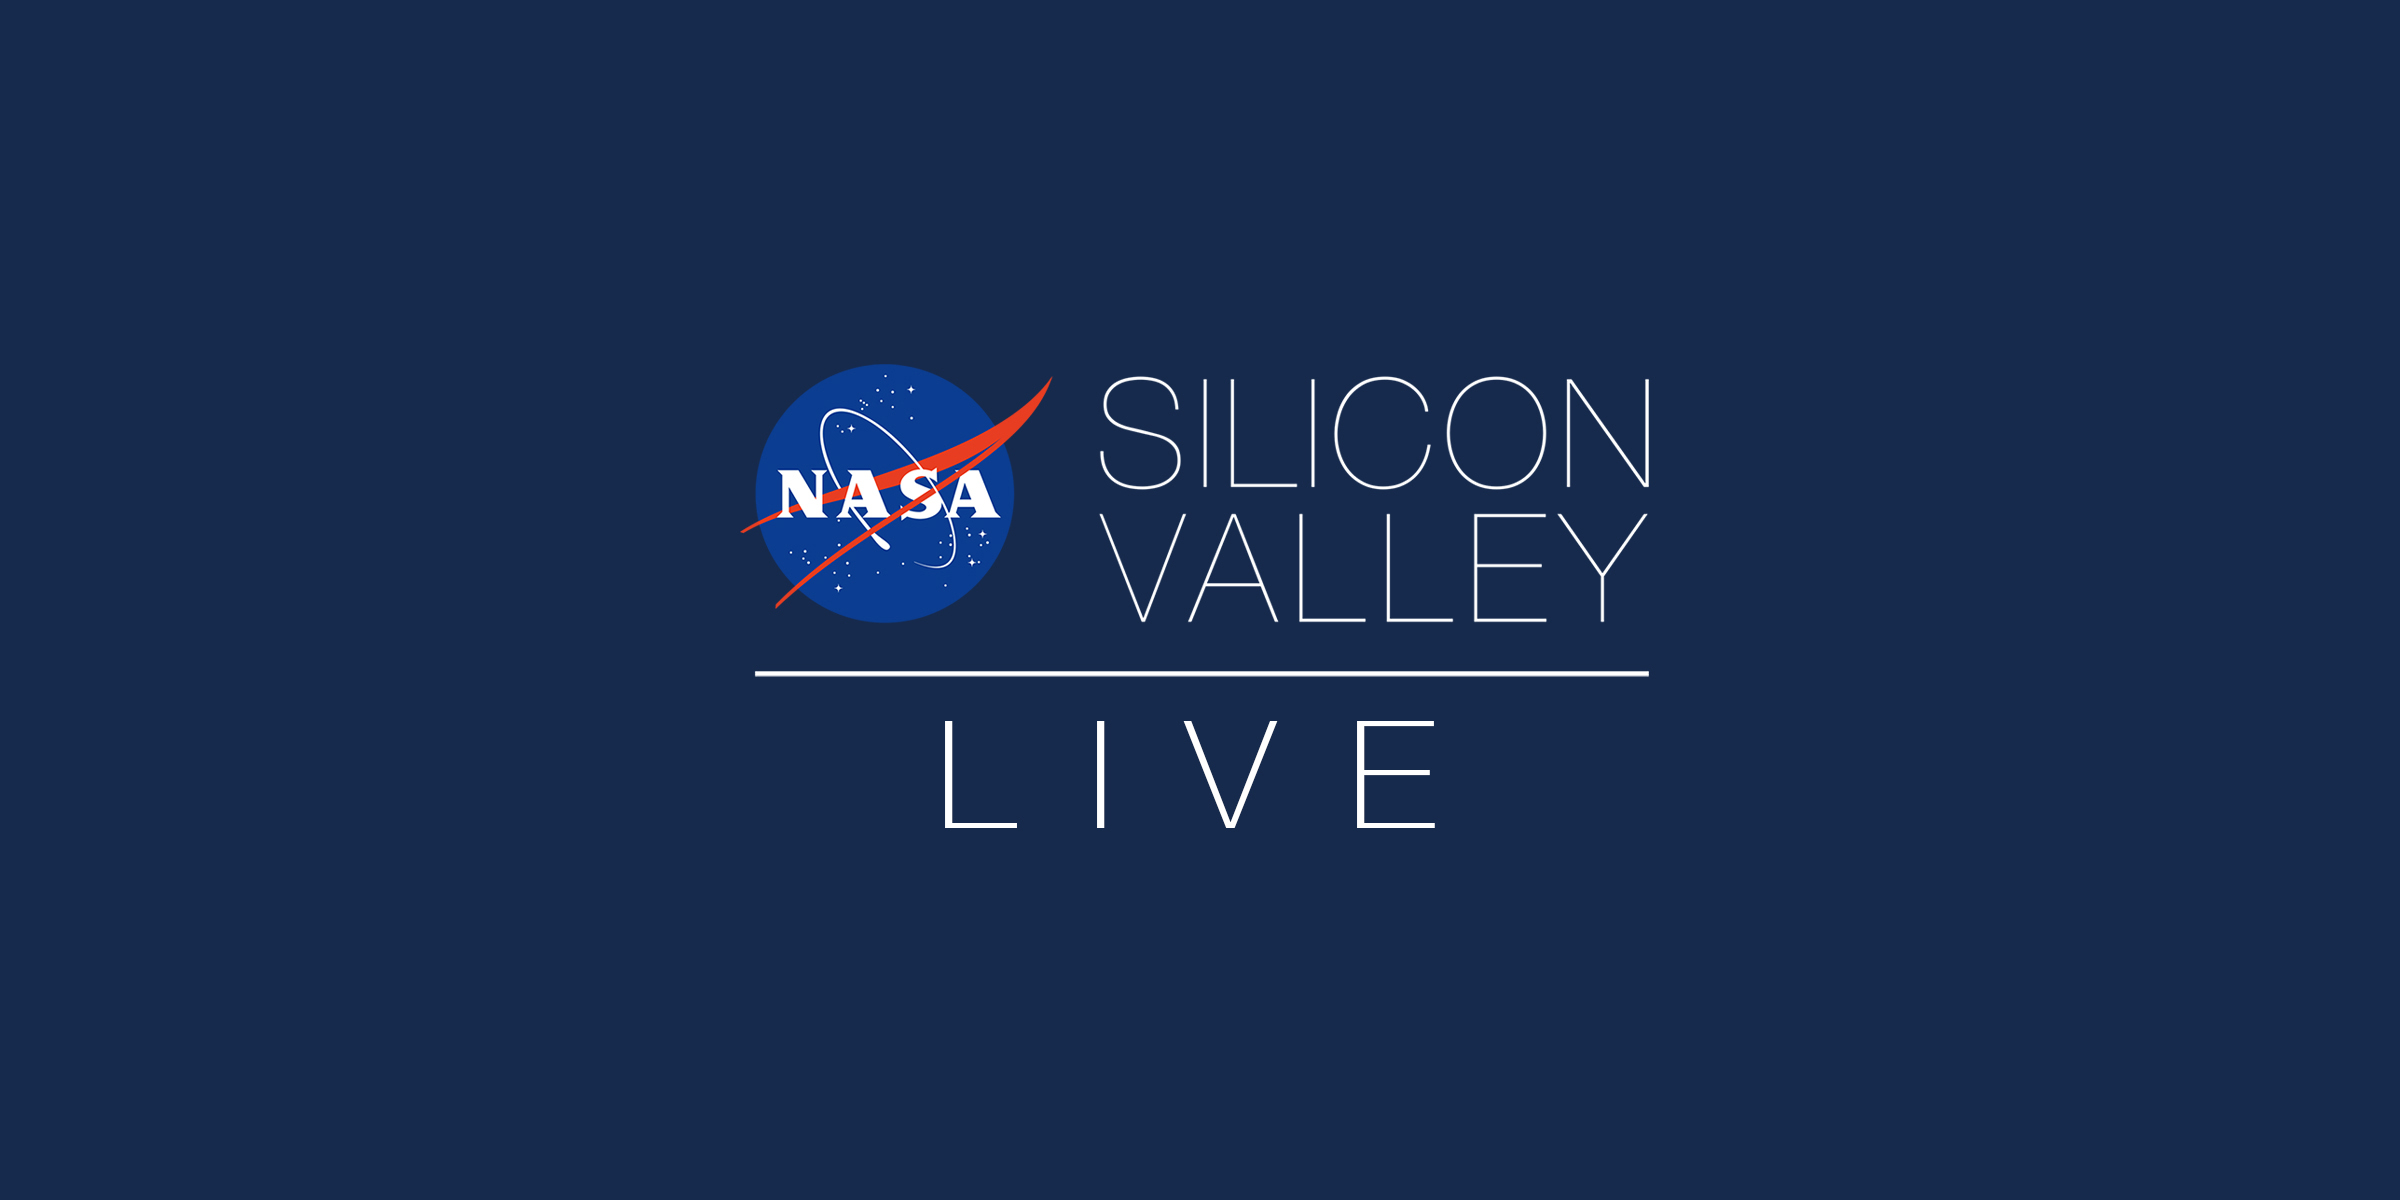 NASA in Silicon Valley Live - Robotic Exploration of the Moon